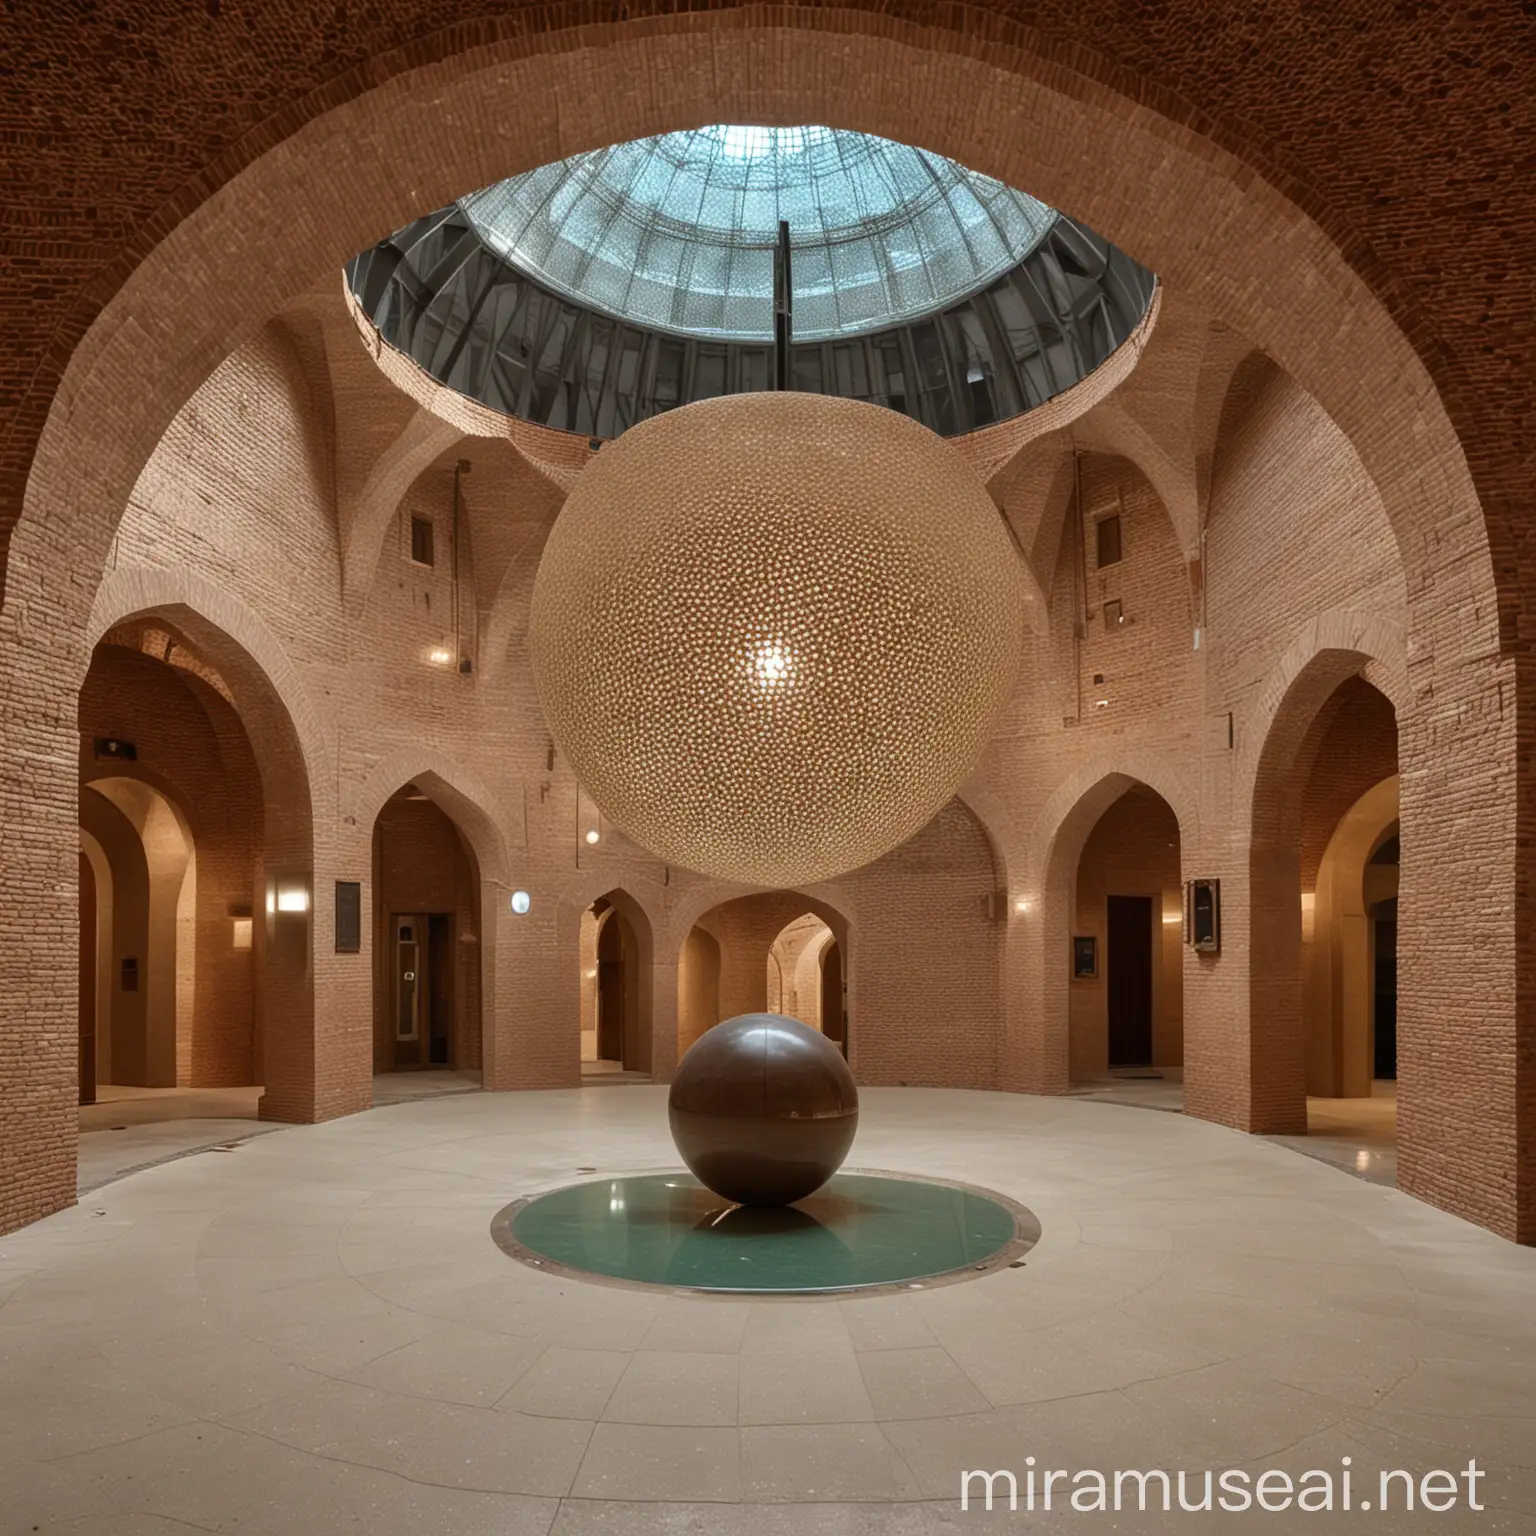 sphere interior, night, sphere architecture, museum, lobby, closed ceiling, brick material, no glass ceiling, iranian architecture, architecture maquette in the middle